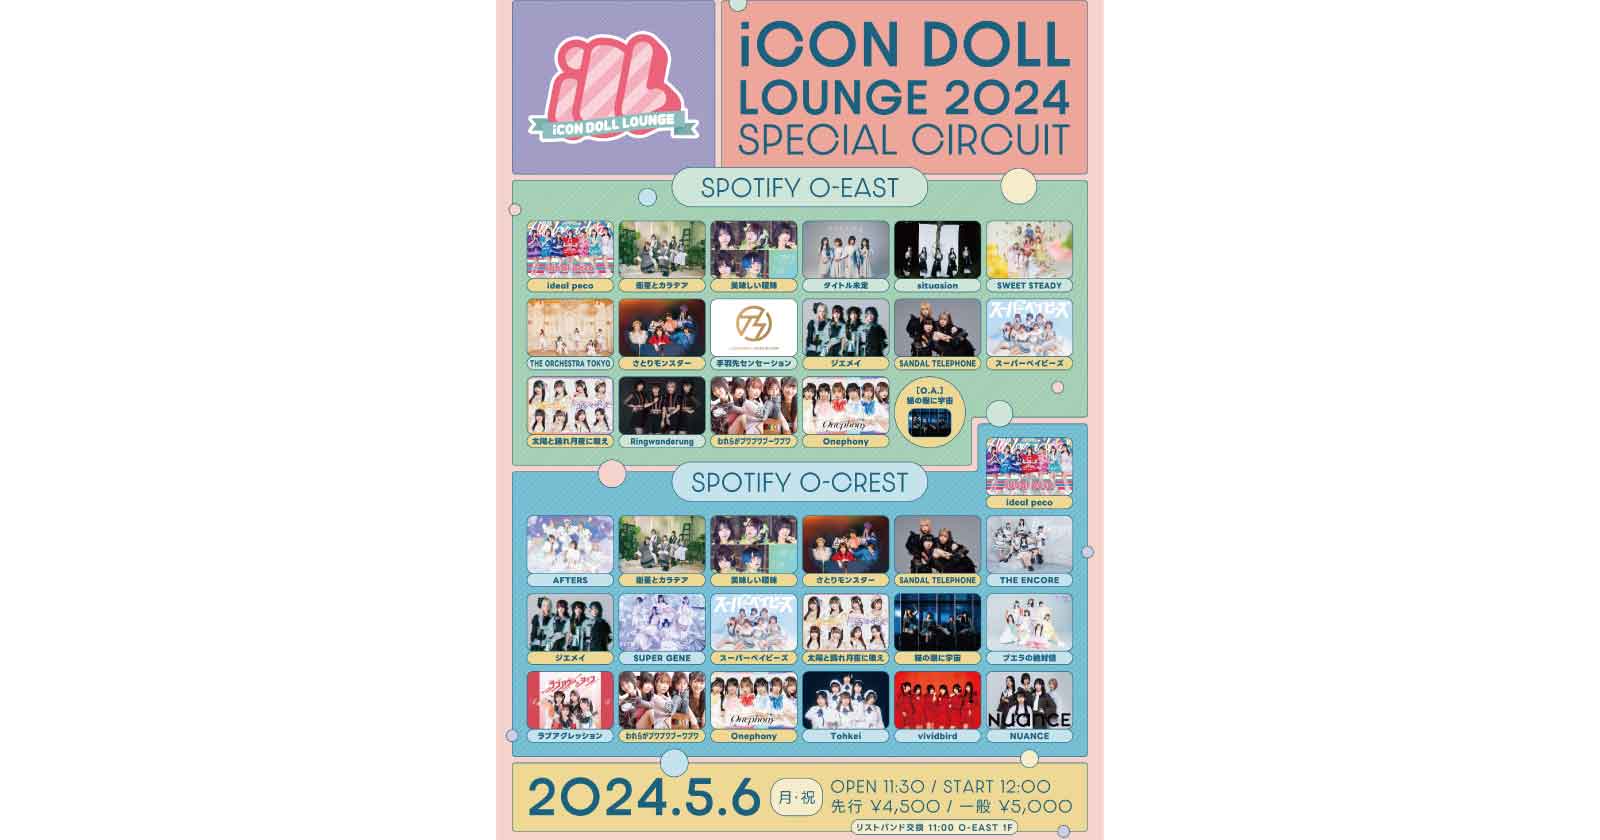 24/5/6_iCON DOLL LOUNGE 2024